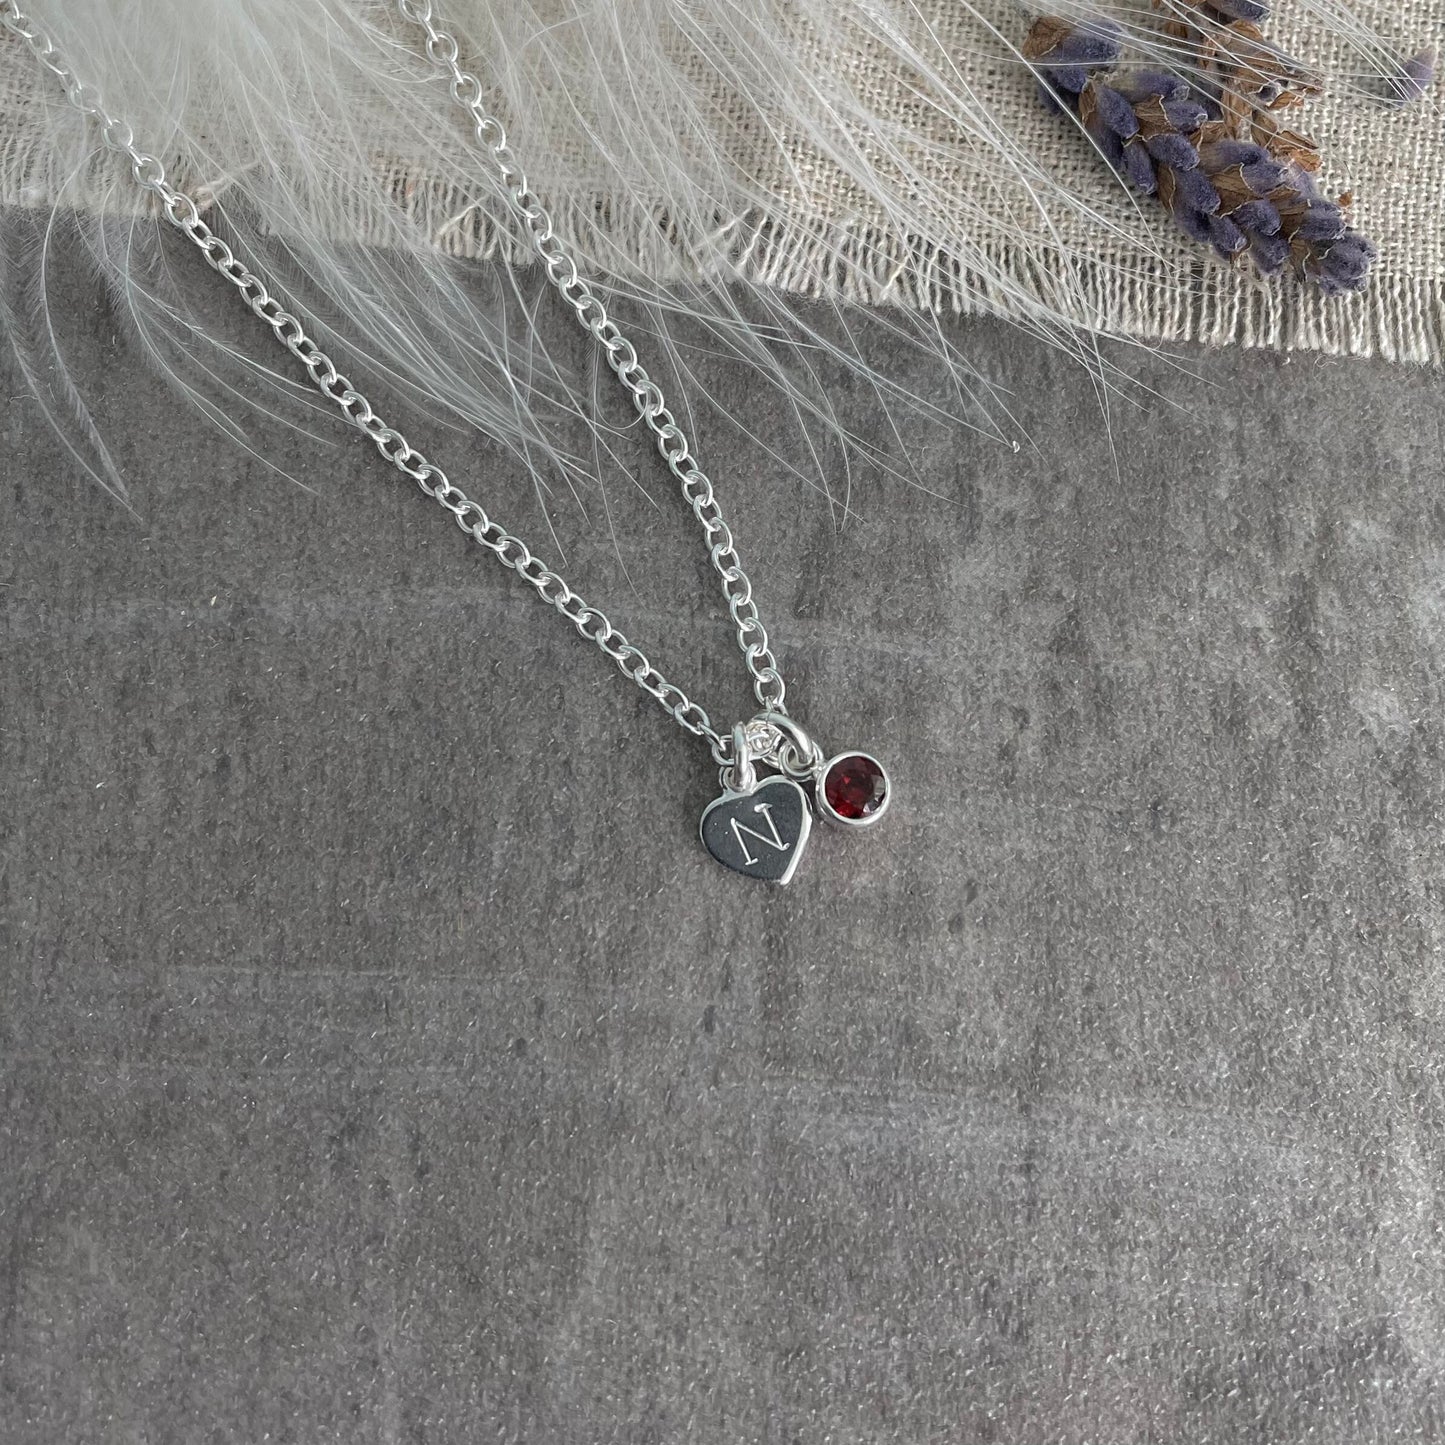 Very Dainty Personalised Initial Birthstone Necklace in Sterling Silver